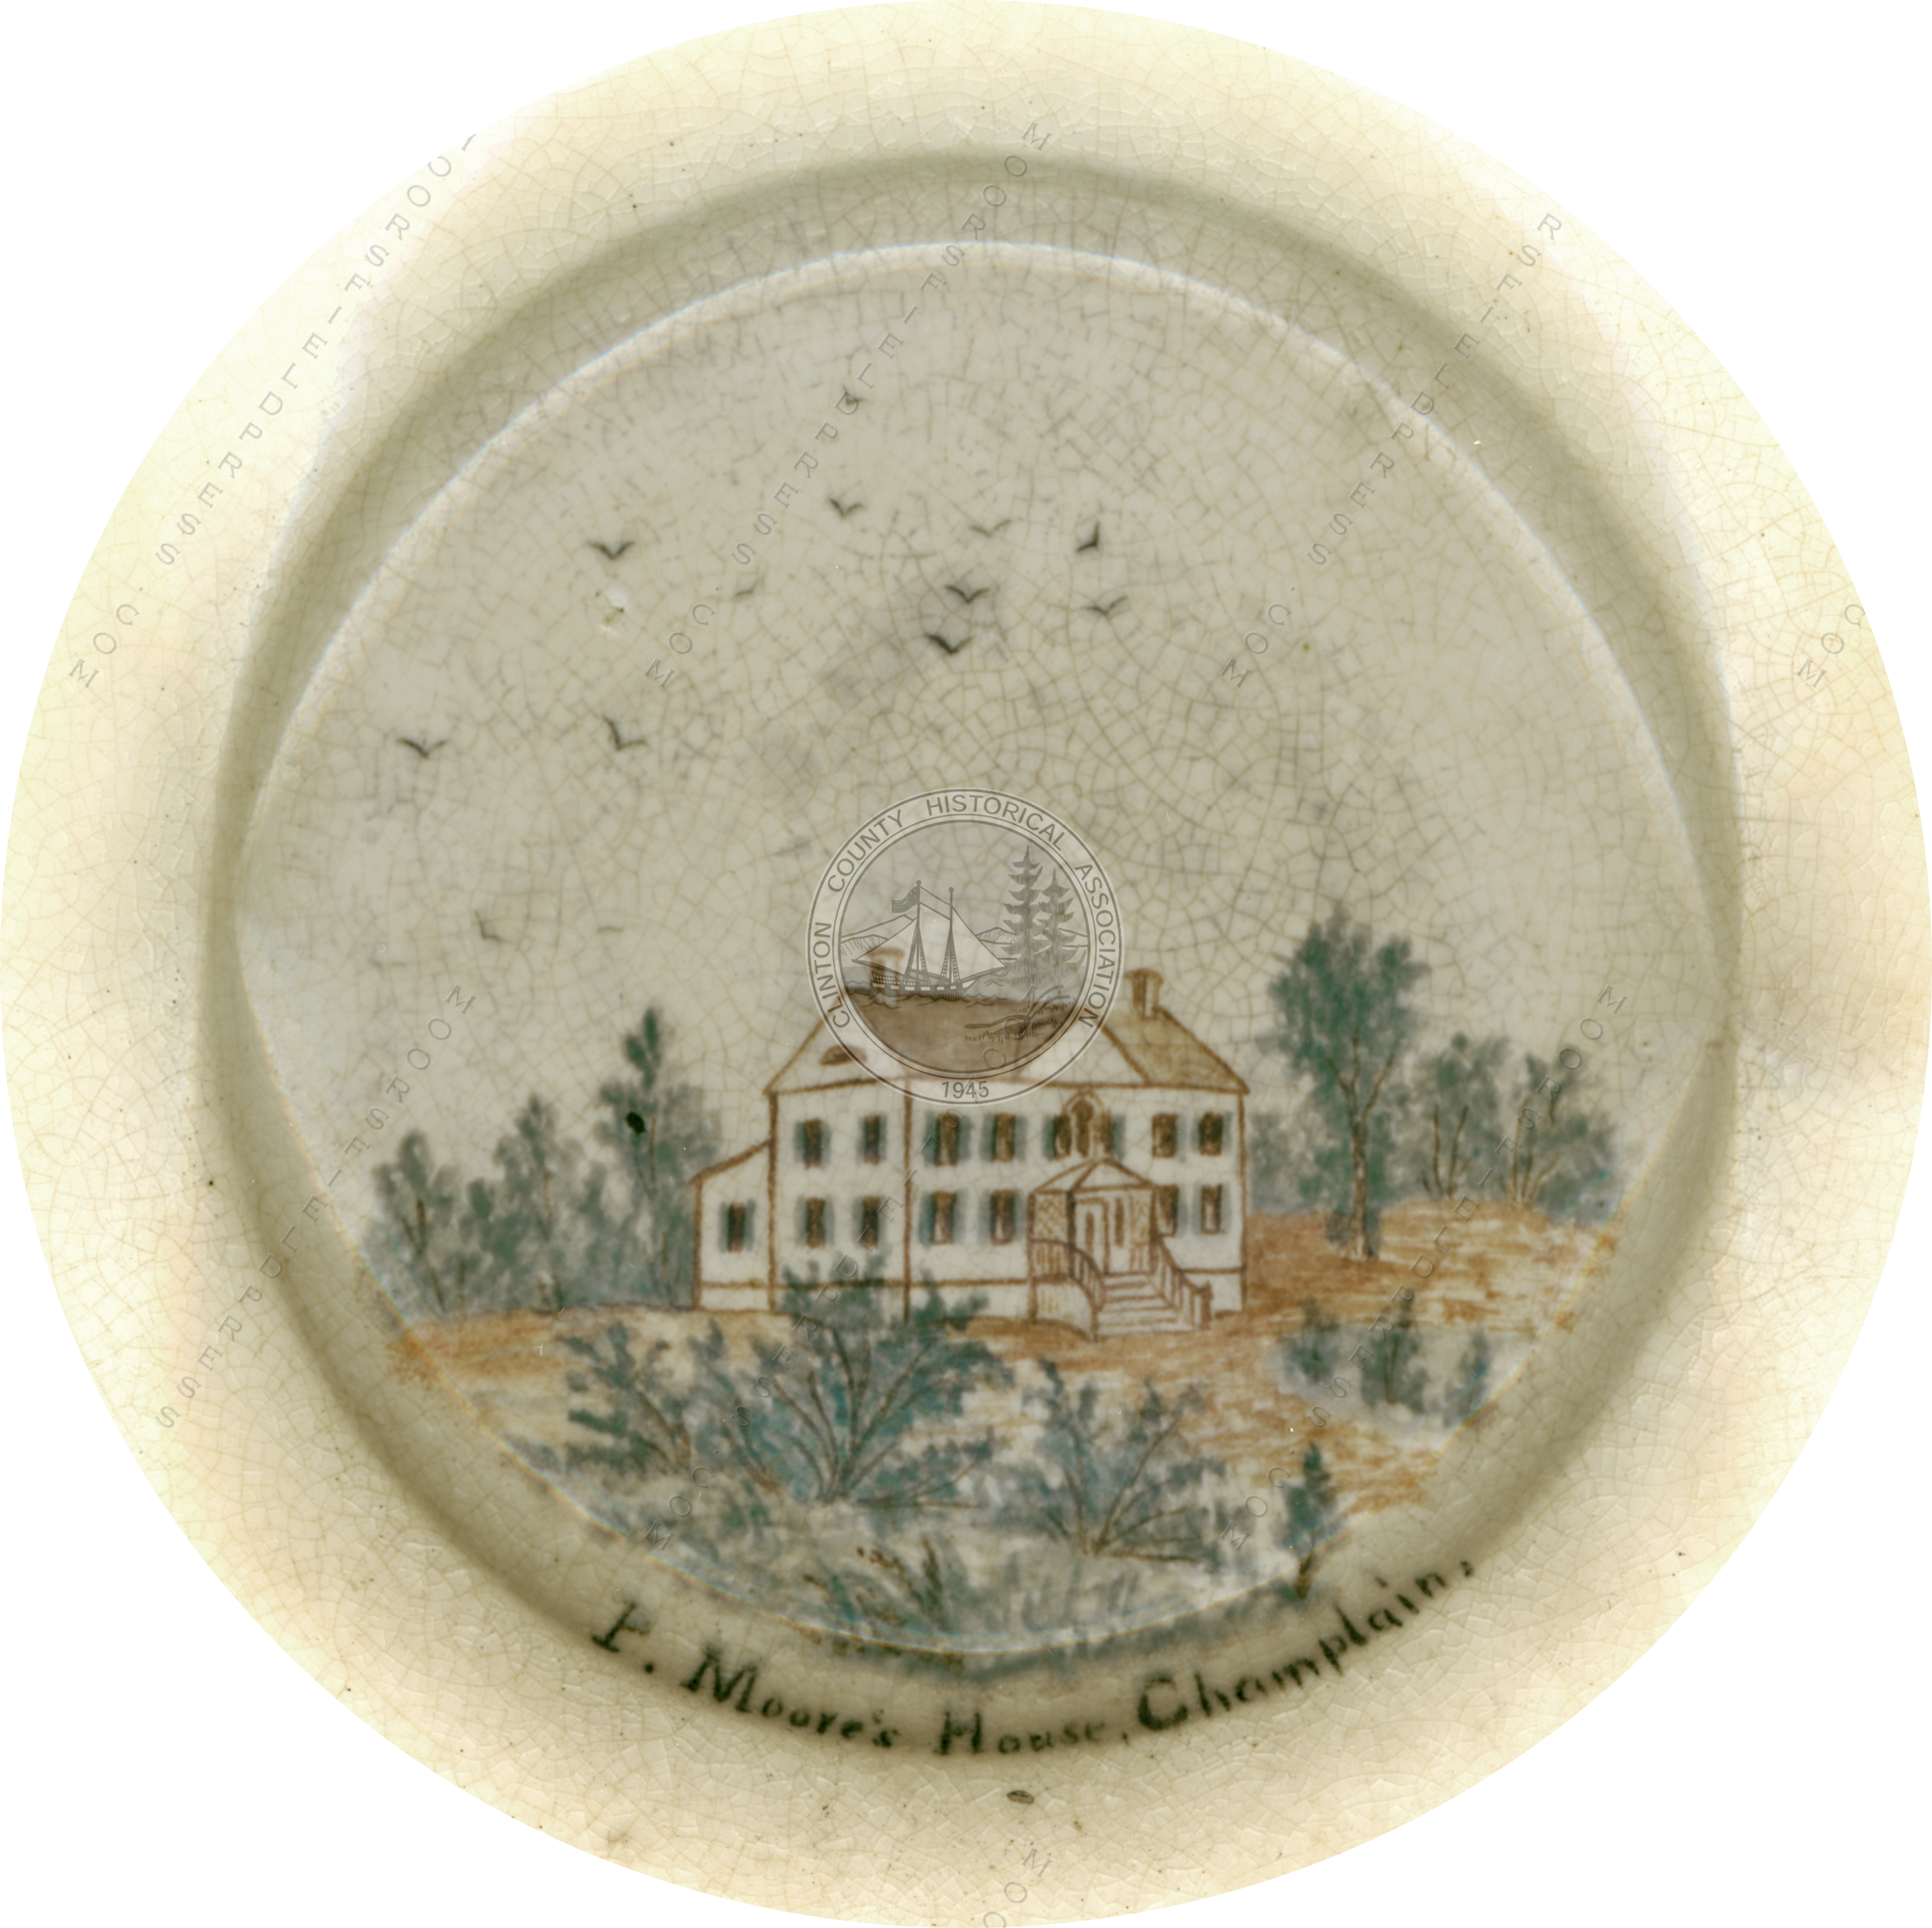 Pliny Moore house on a
                                            ceramic plate painted by
                                            Harriet Stewart Miner 1880